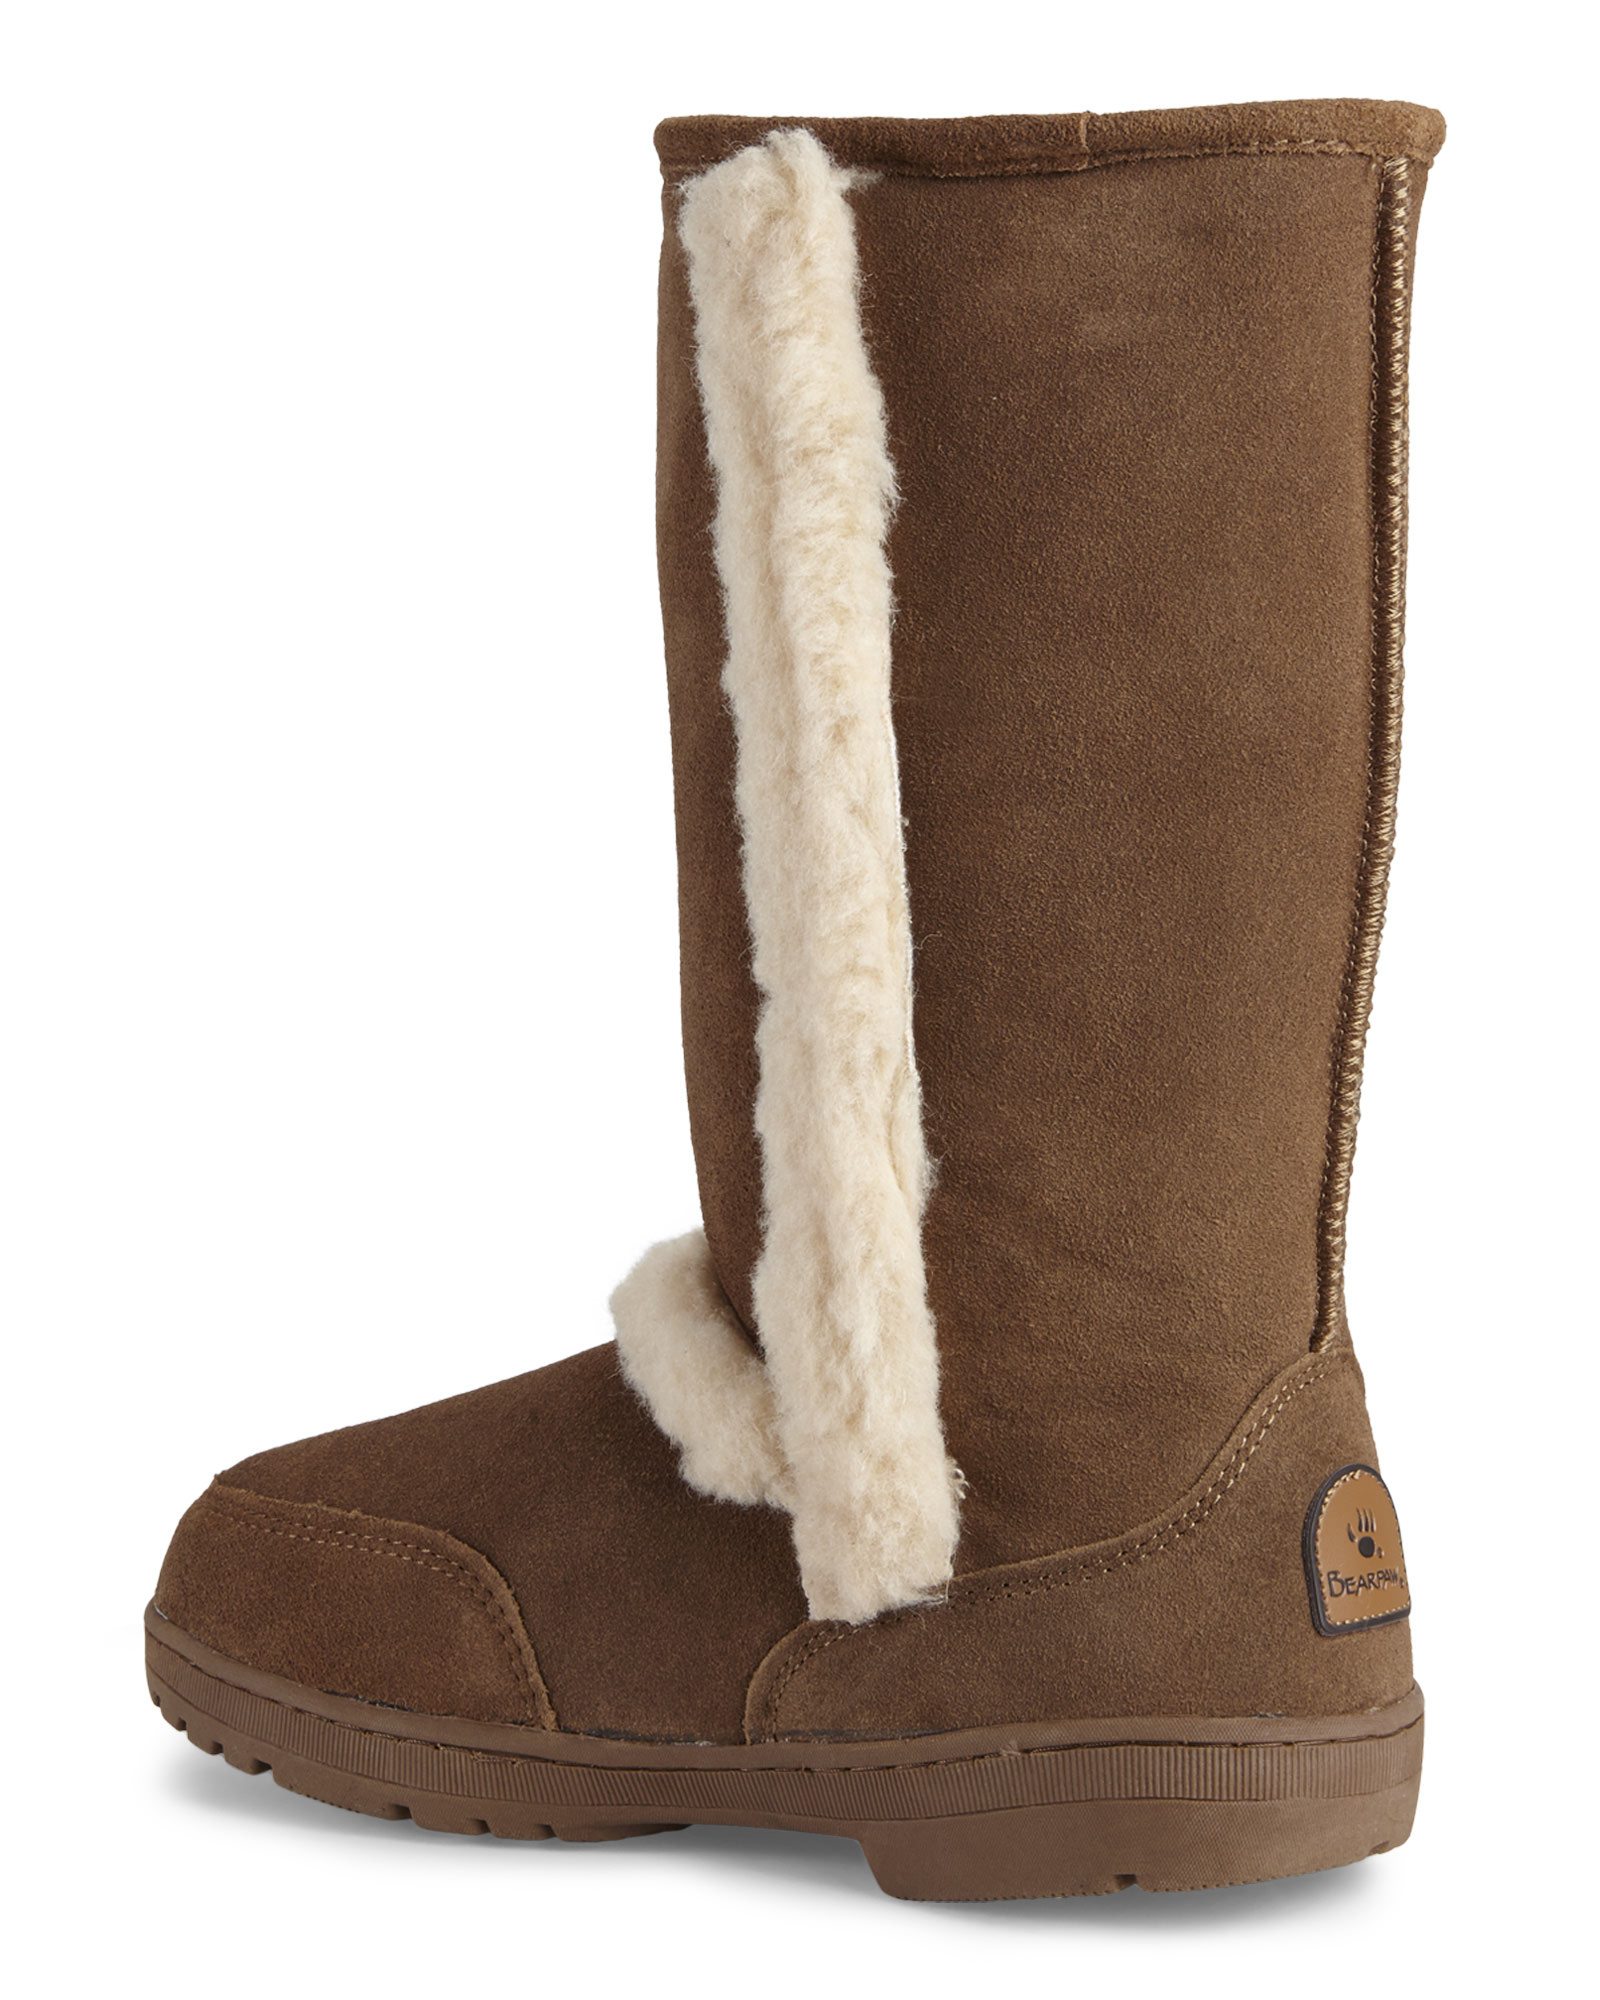 Lyst - Bearpaw Hickory Eskimo Tall Boots in Brown